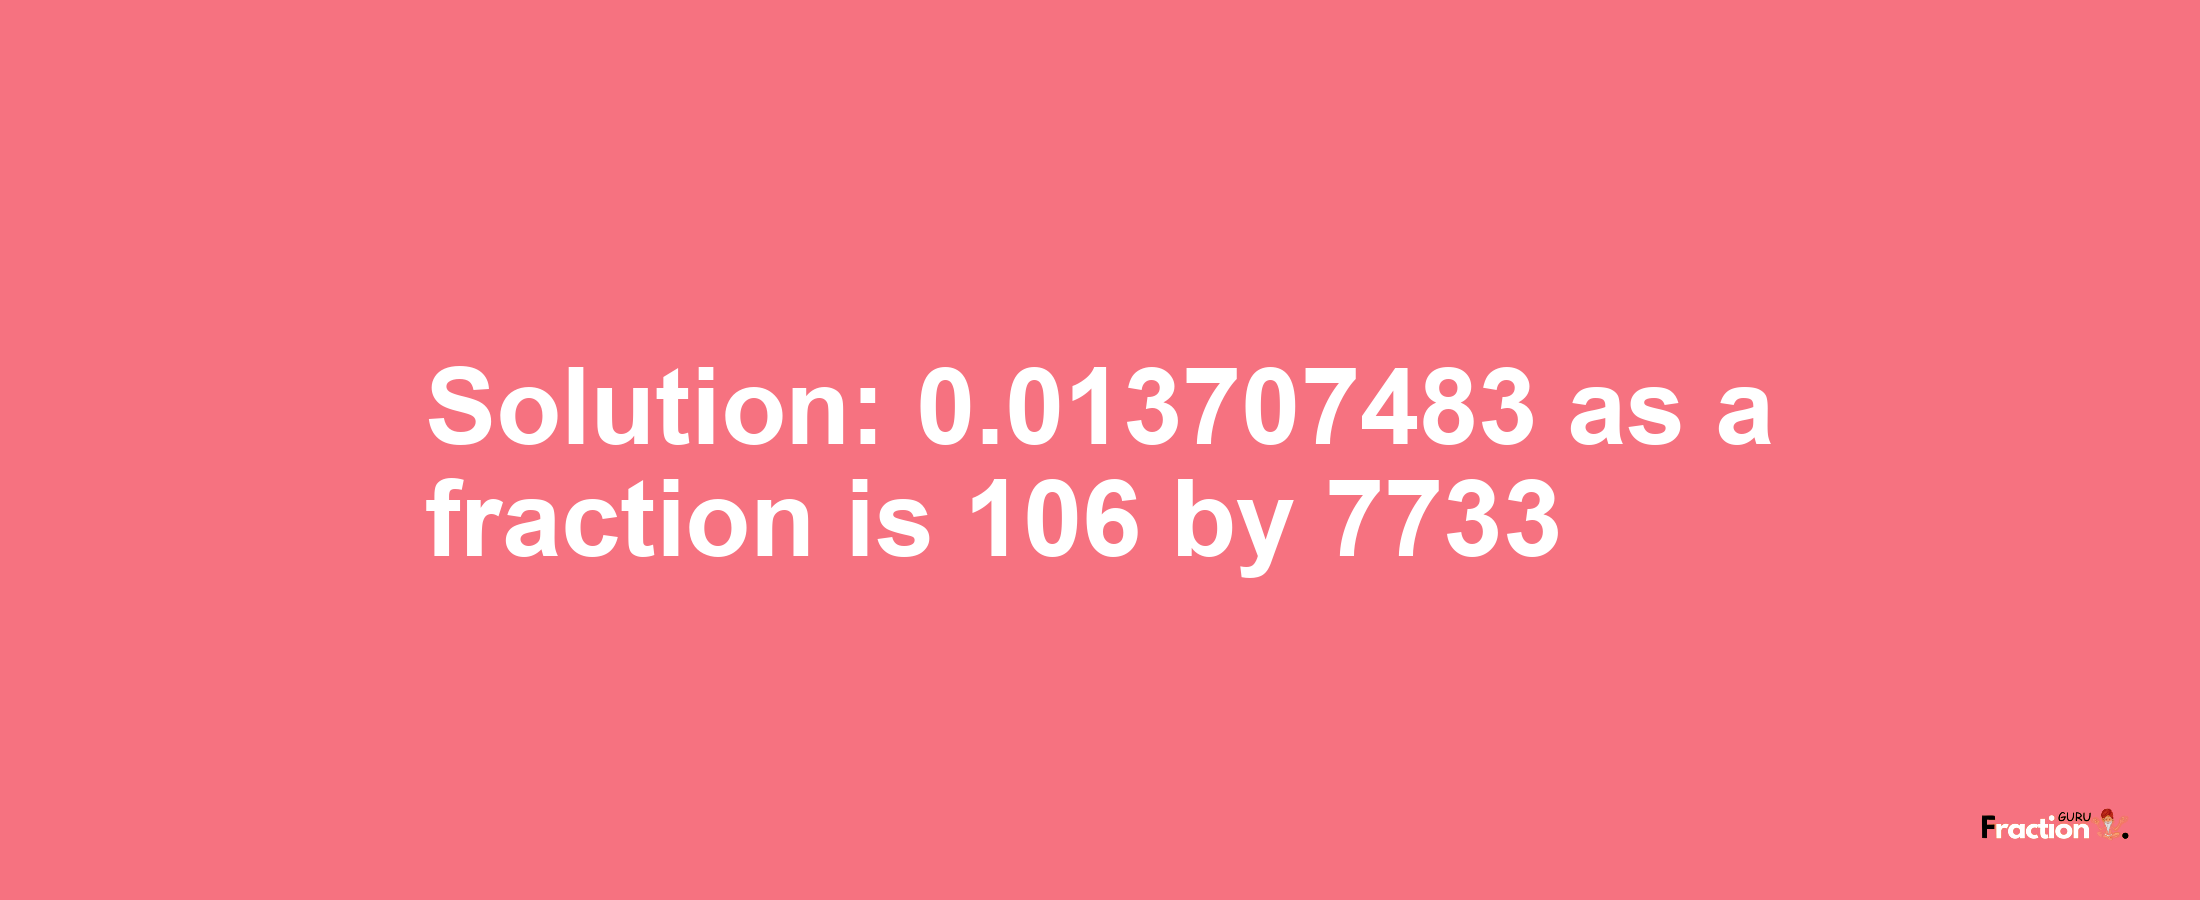 Solution:0.013707483 as a fraction is 106/7733